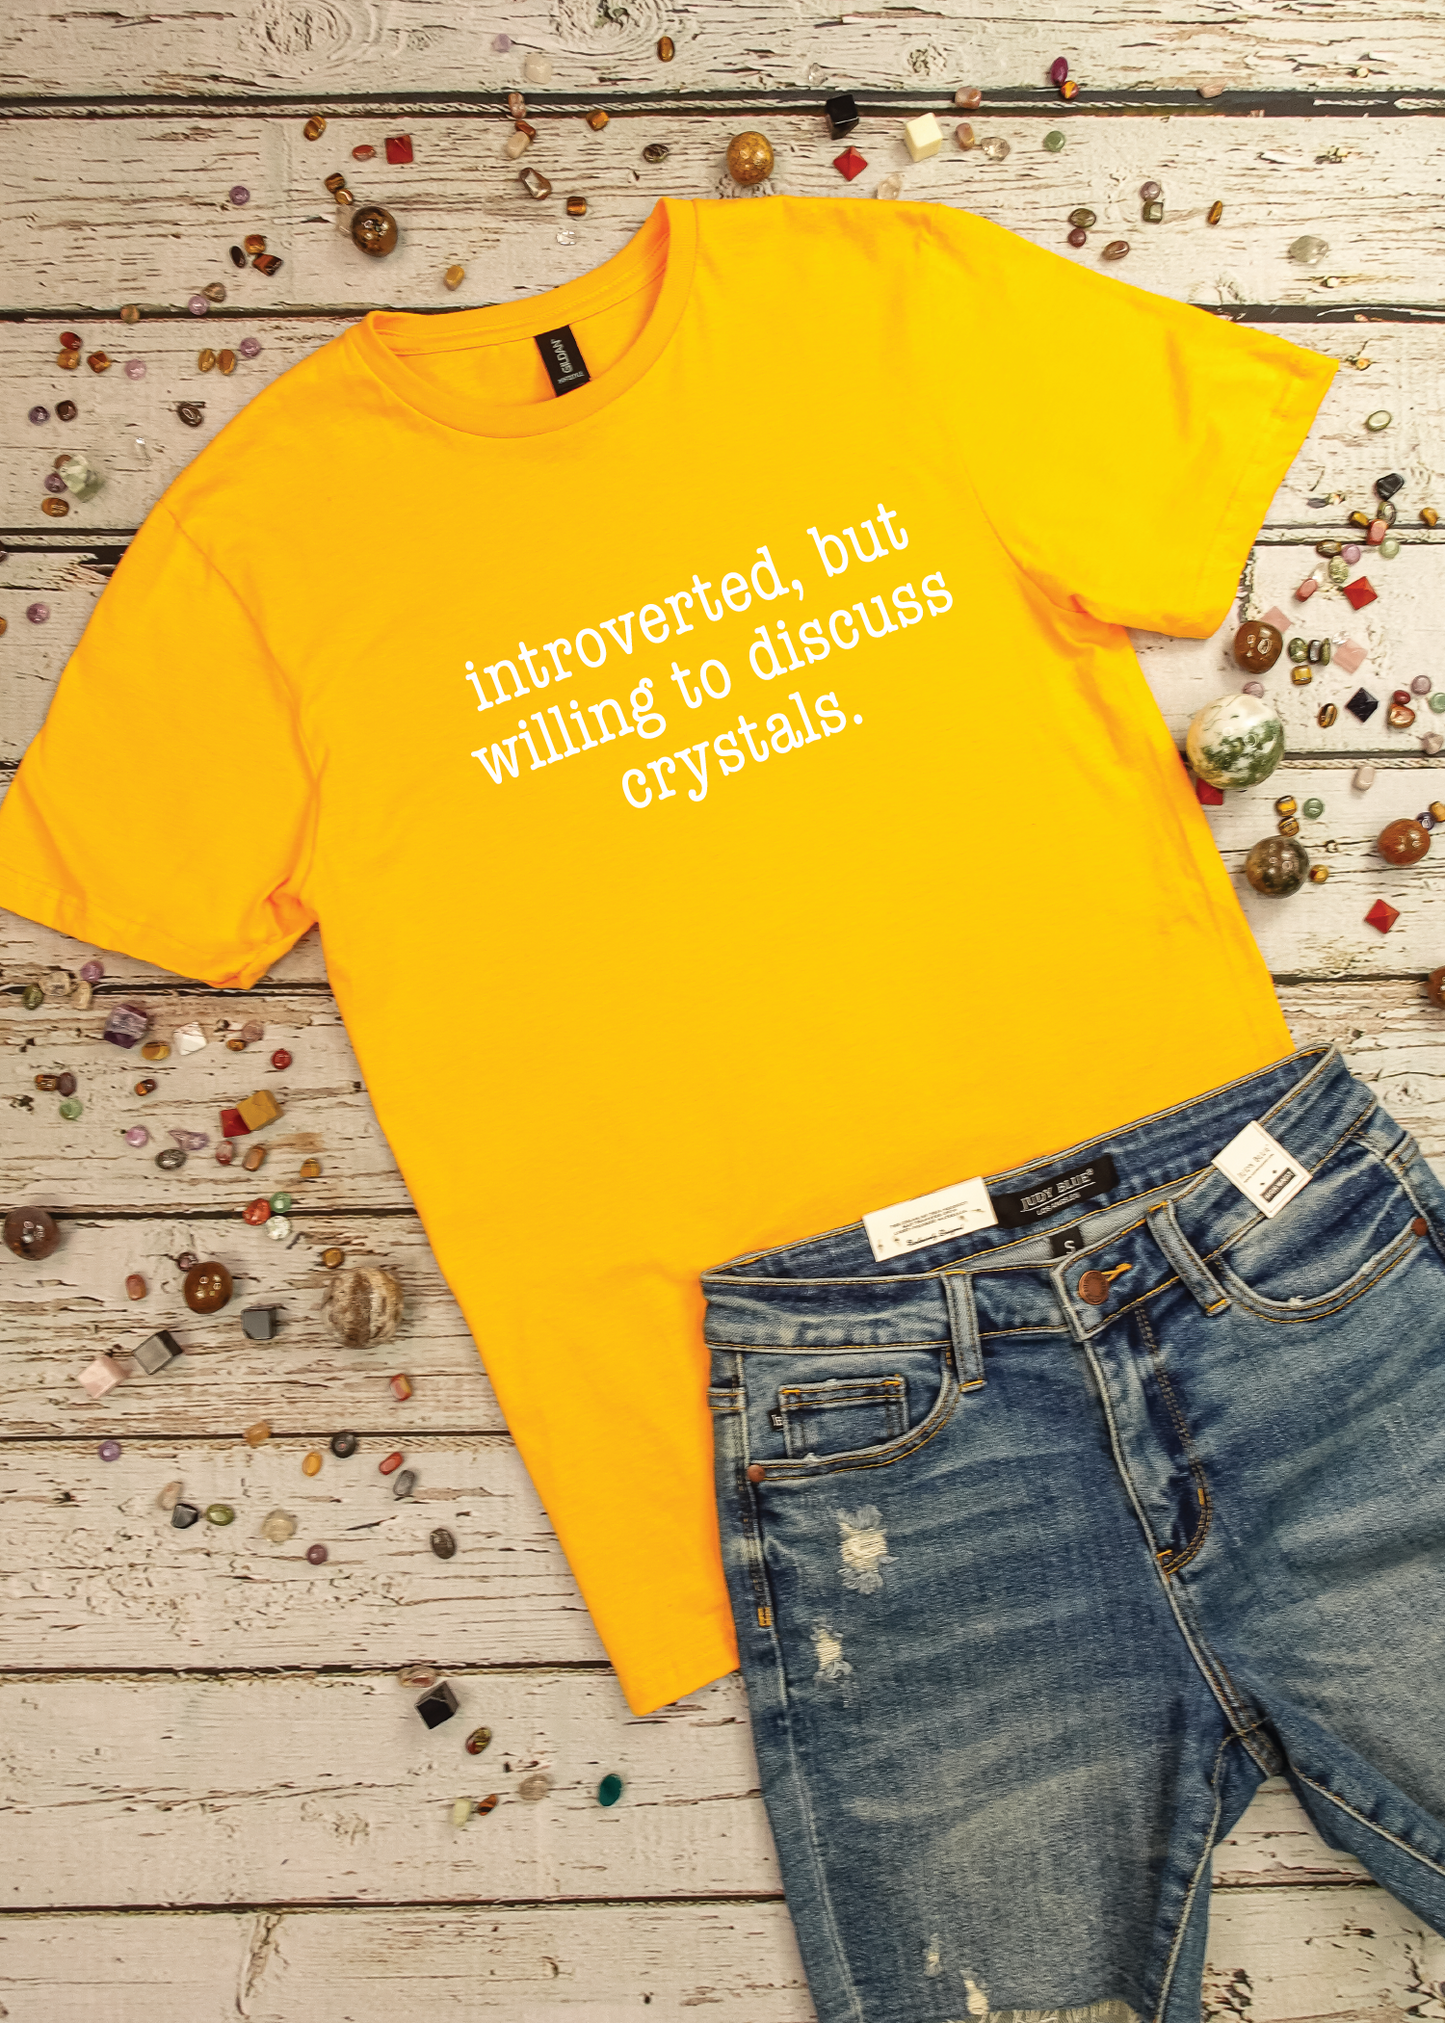 Introverted But Will Discuss Crystals - Graphic Tee